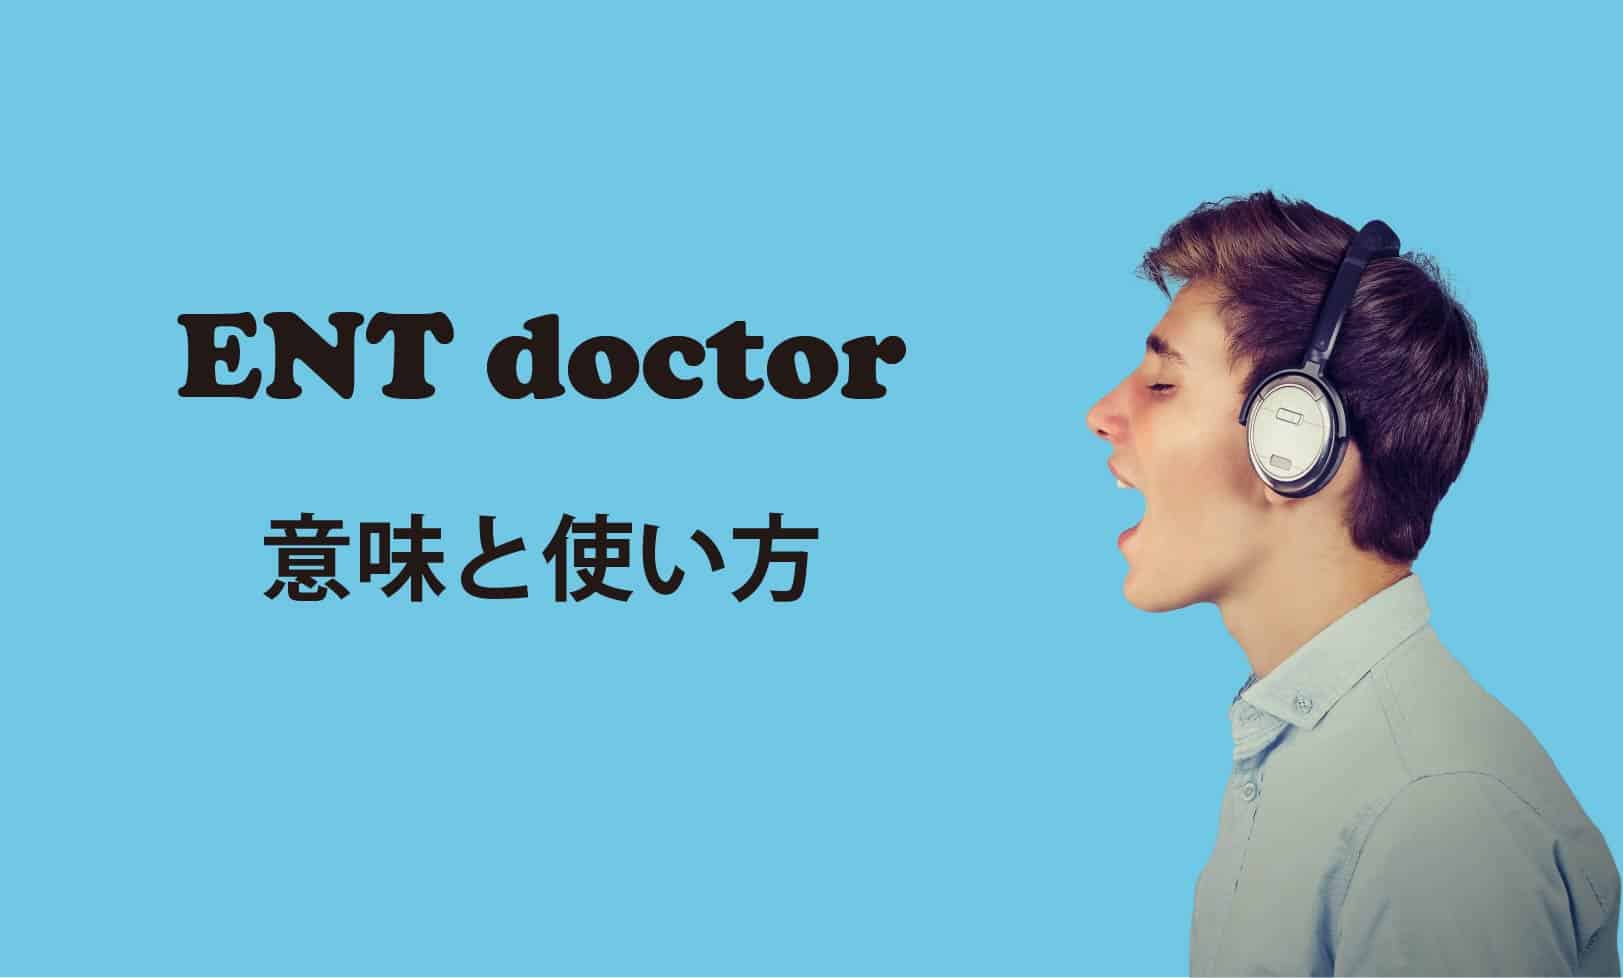 ENT doctor ブログ　表紙